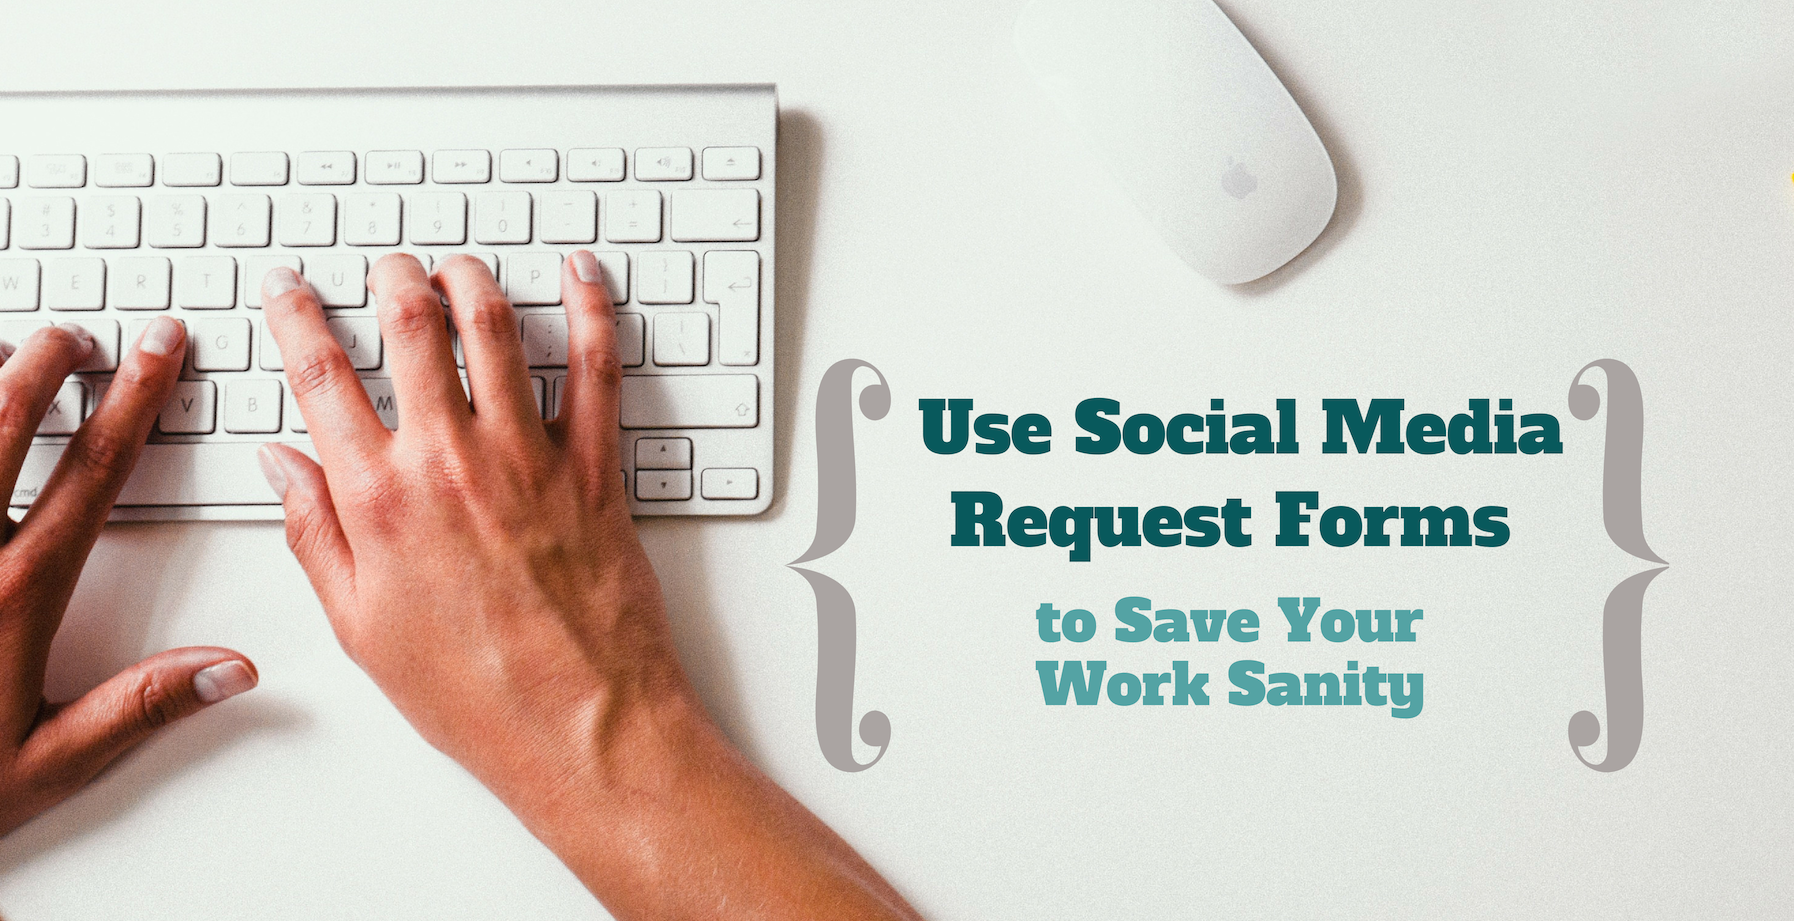 Use Social Media Request Forms To Save Your Work Sanity Susan s Site